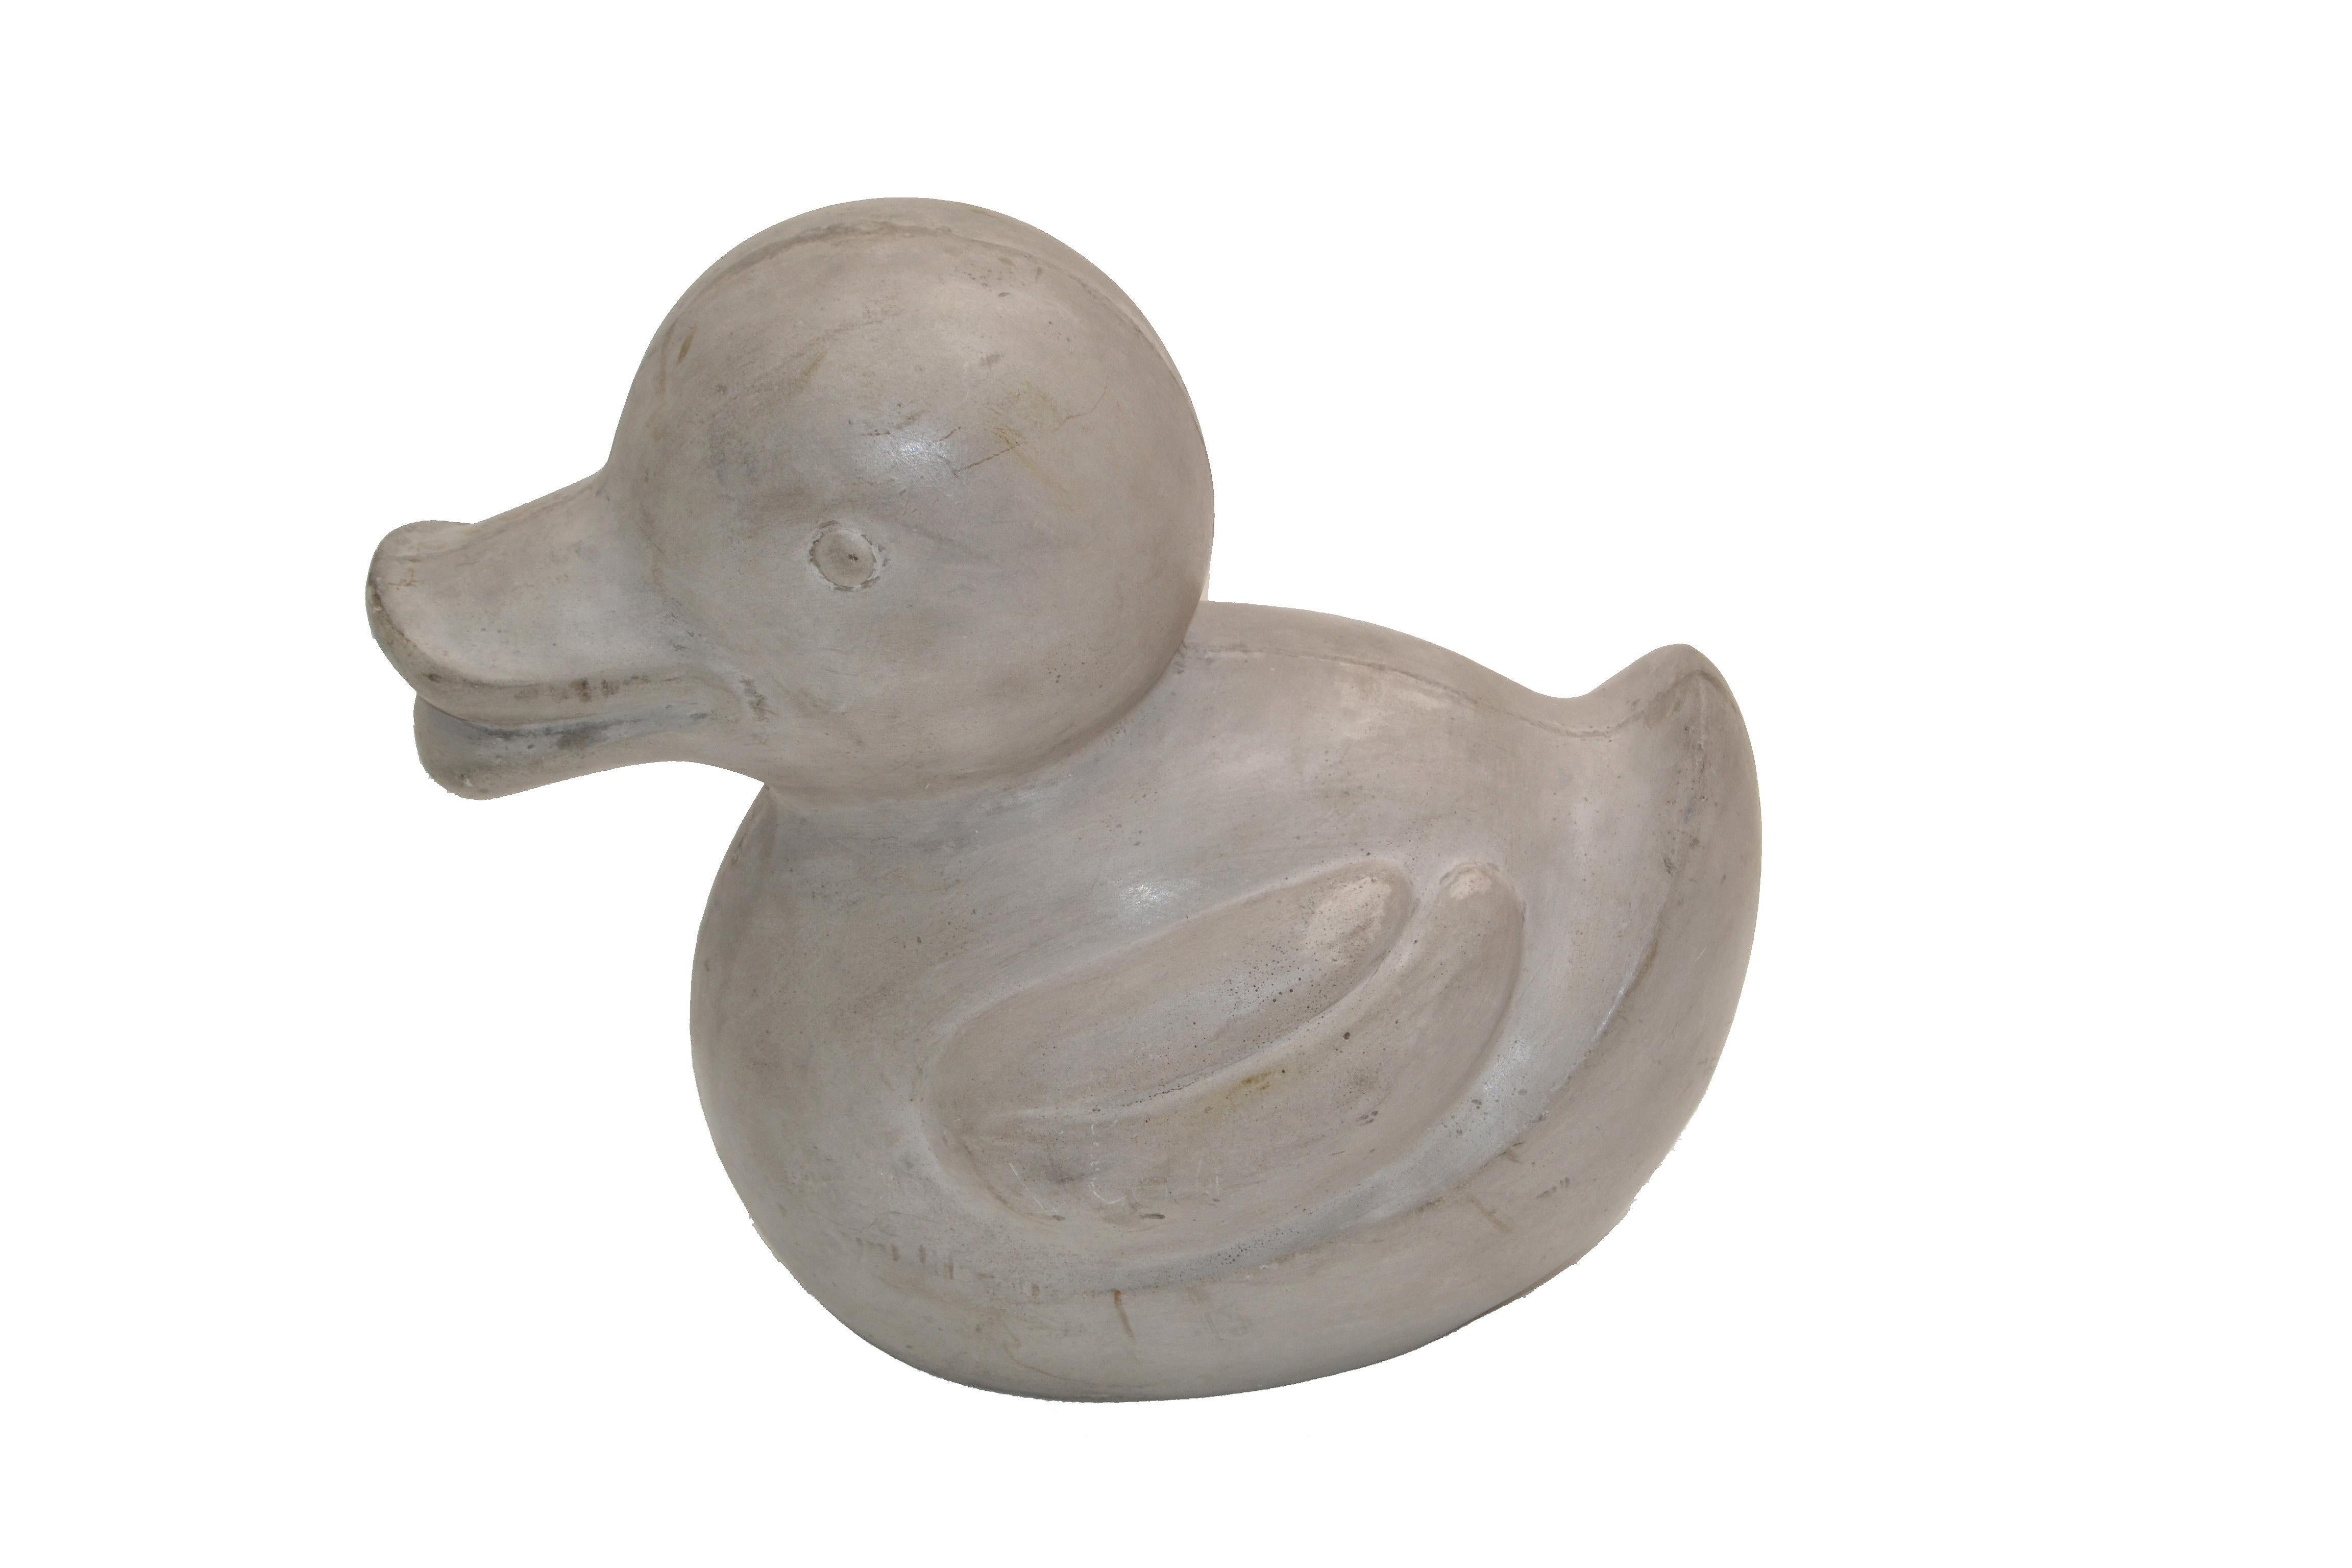 Distressed Look Decorative Handcrafted Cement Mold Duck, Animal Sculpture 3